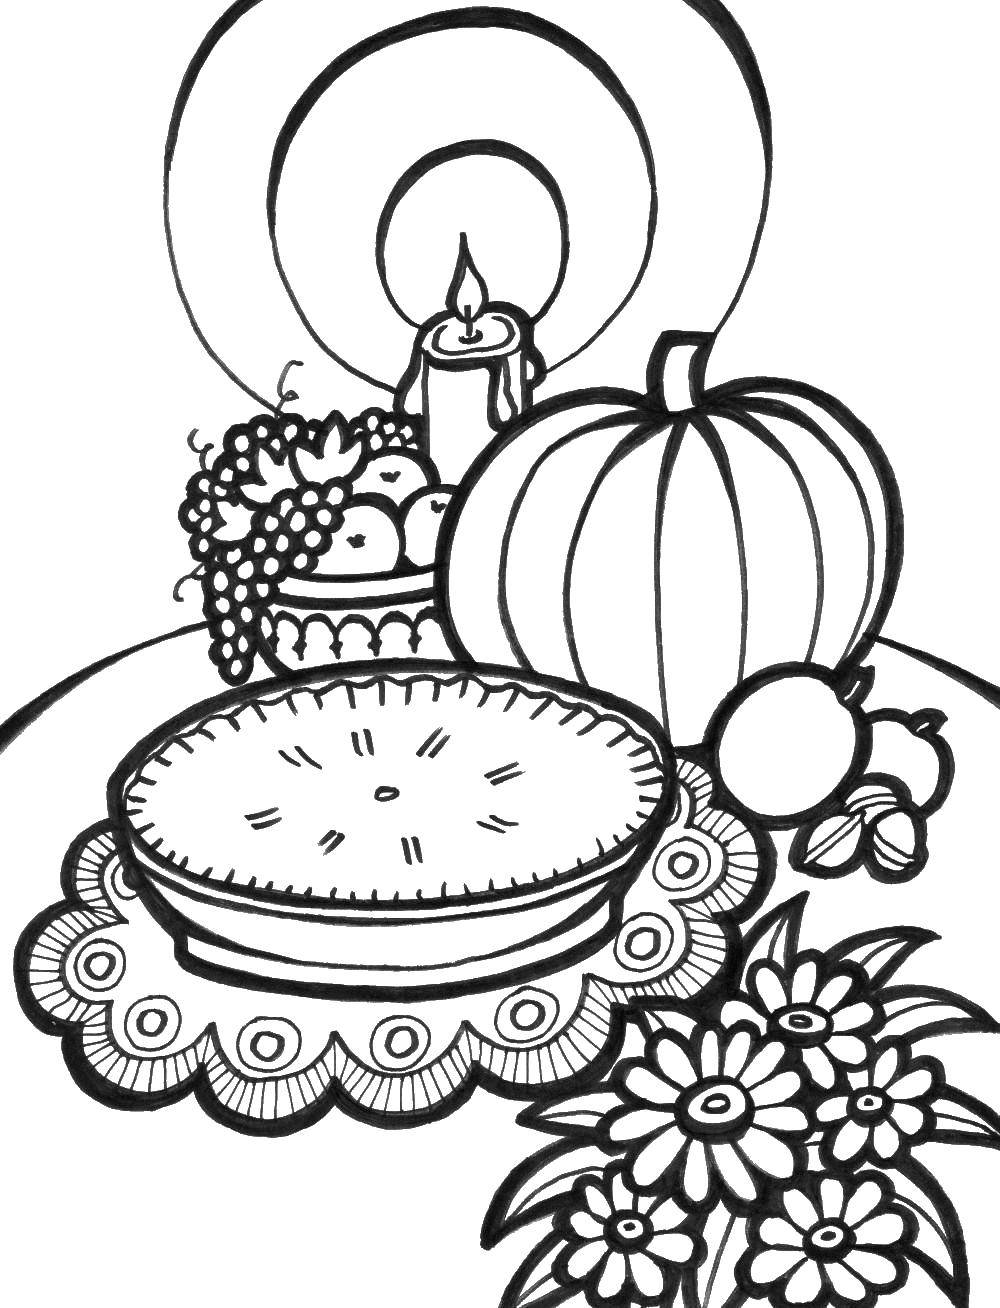 Coloring Festive table. Category The food. Tags:  table, food.